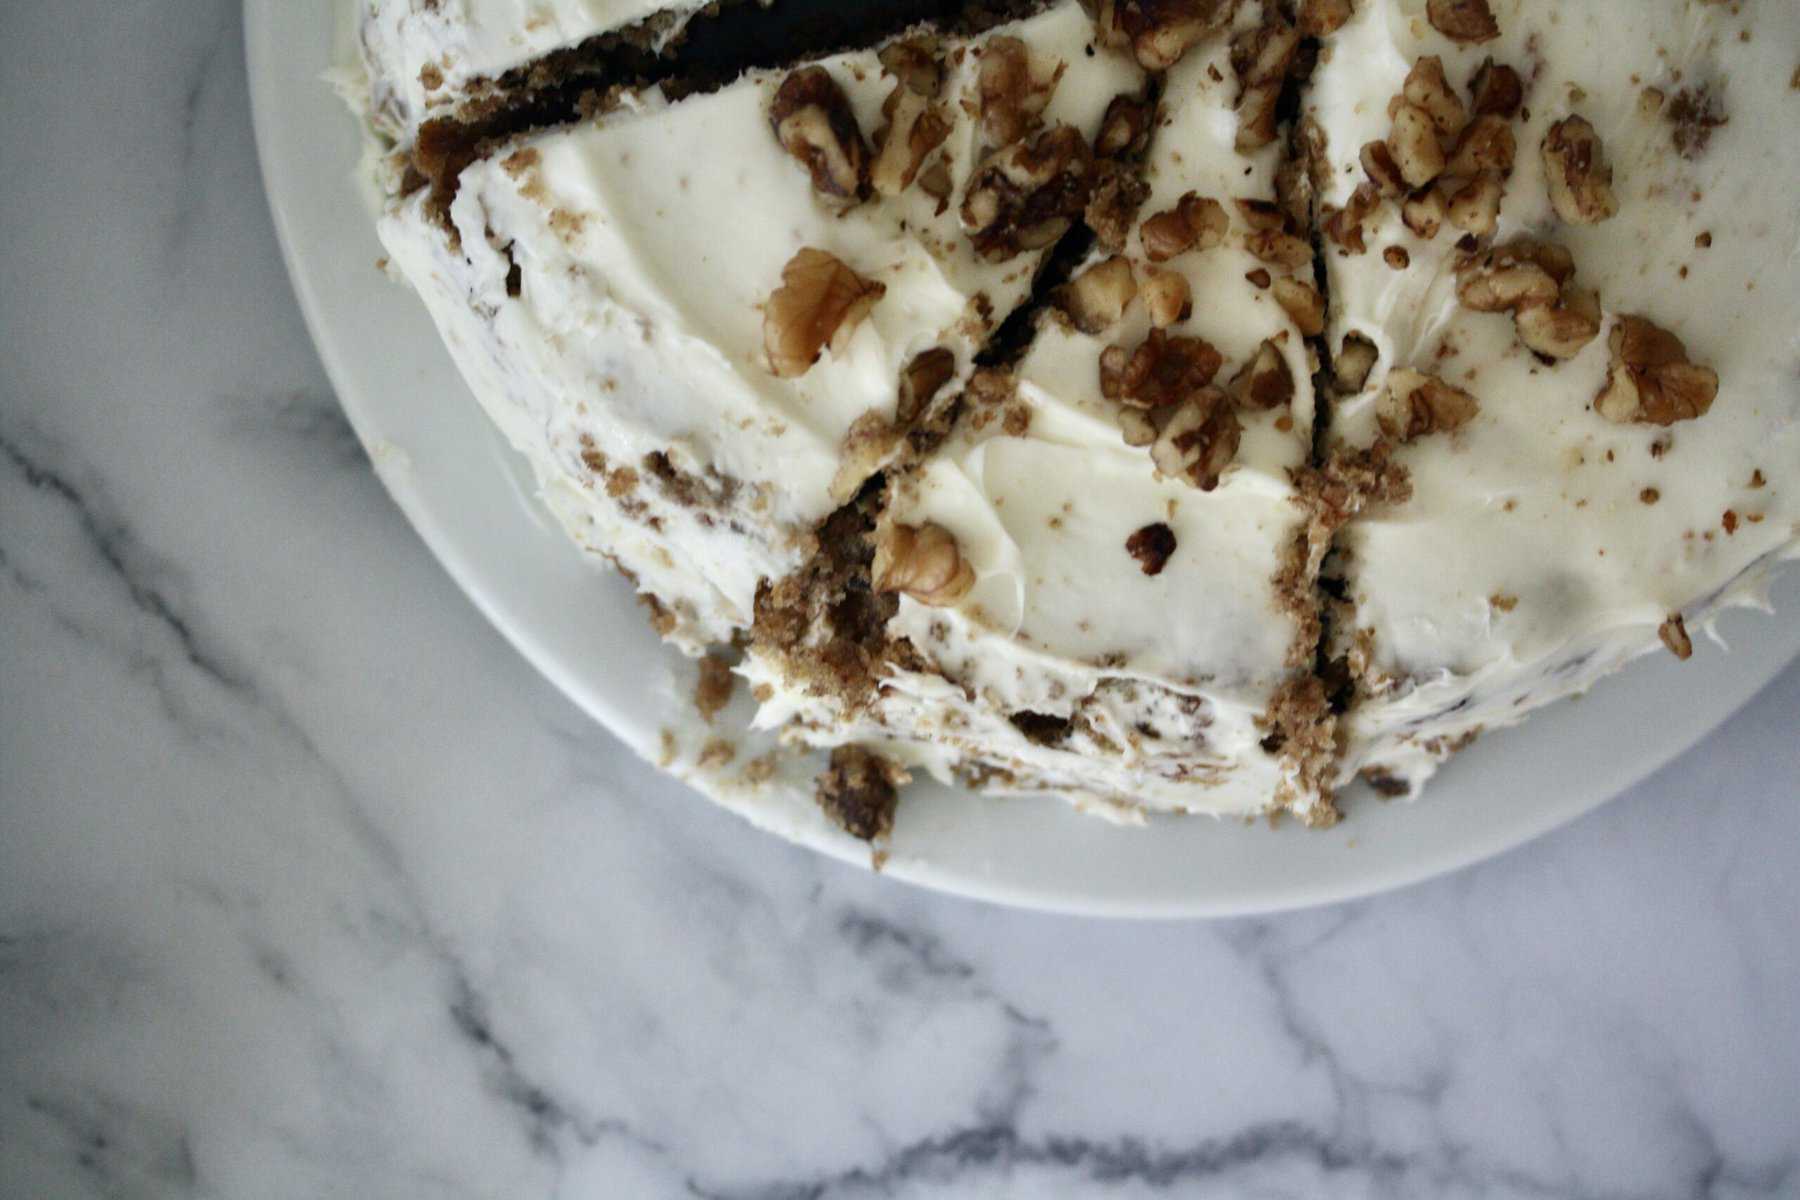 A hummingbird cake topped with toasted walnuts.